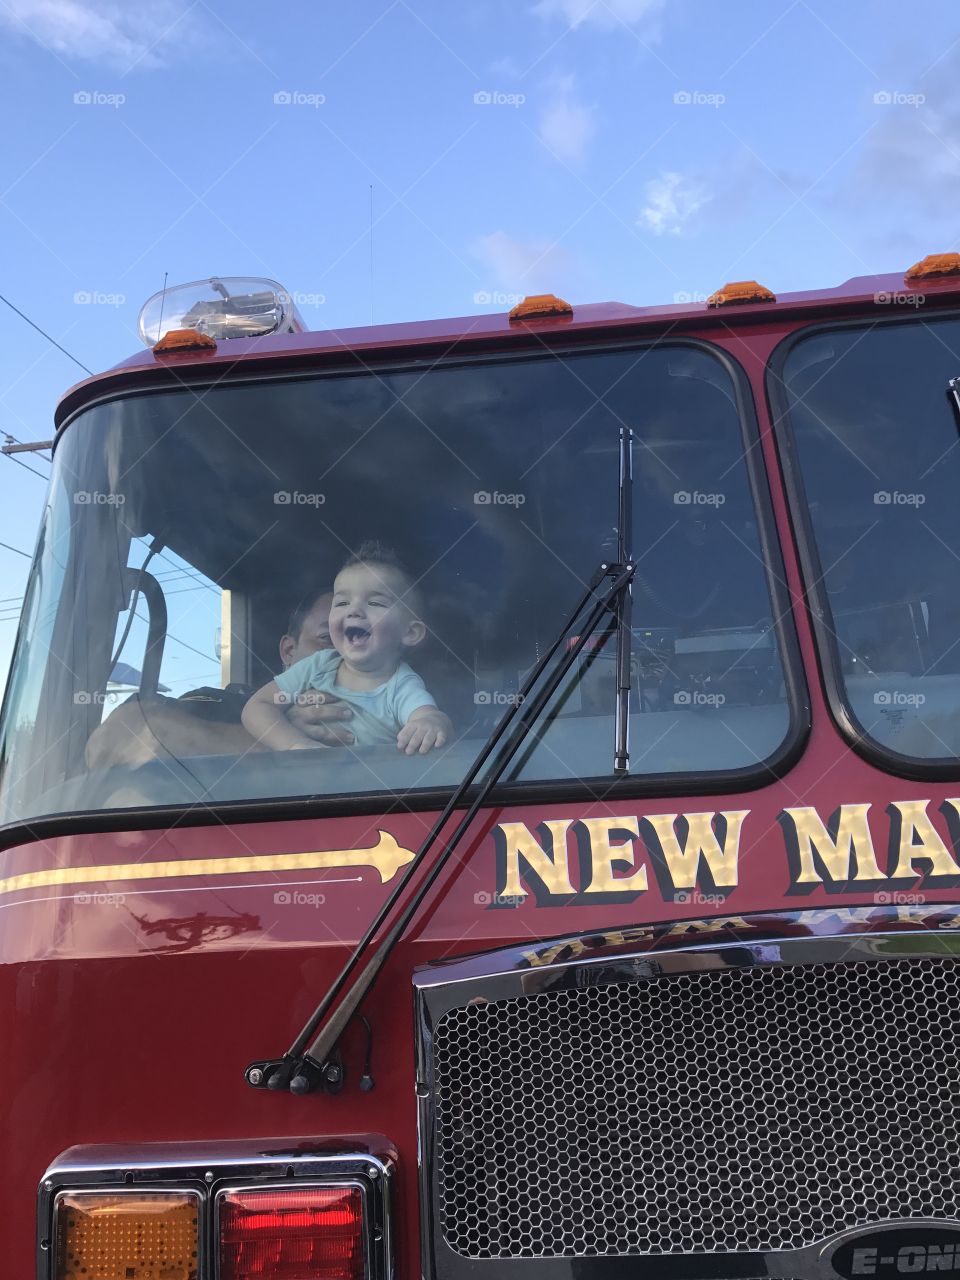 Nothing like your first time in a fire truck 🚒